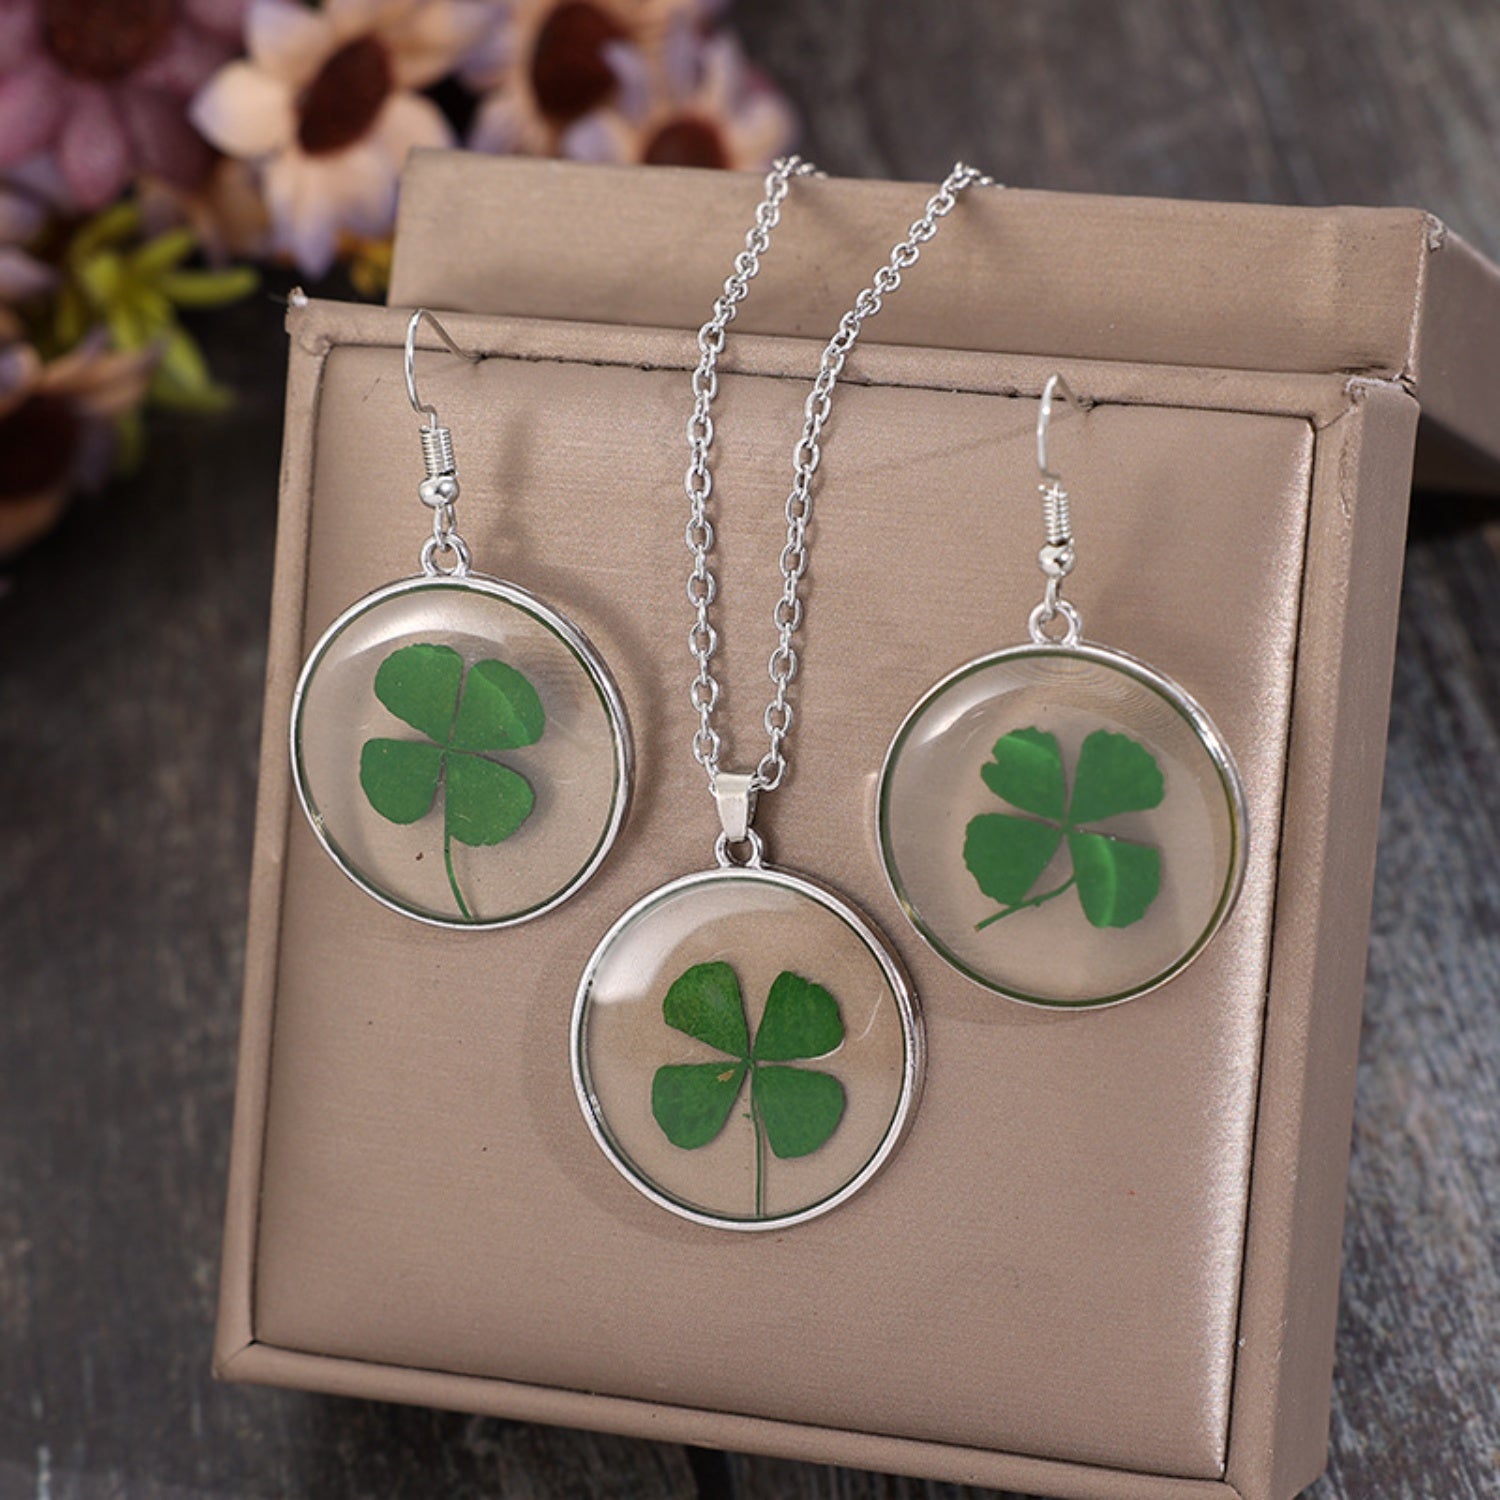 Lucky Clover Alloy Acrylic Earrings and Necklace Jewelry Set - Teresa's Fashionista LLC